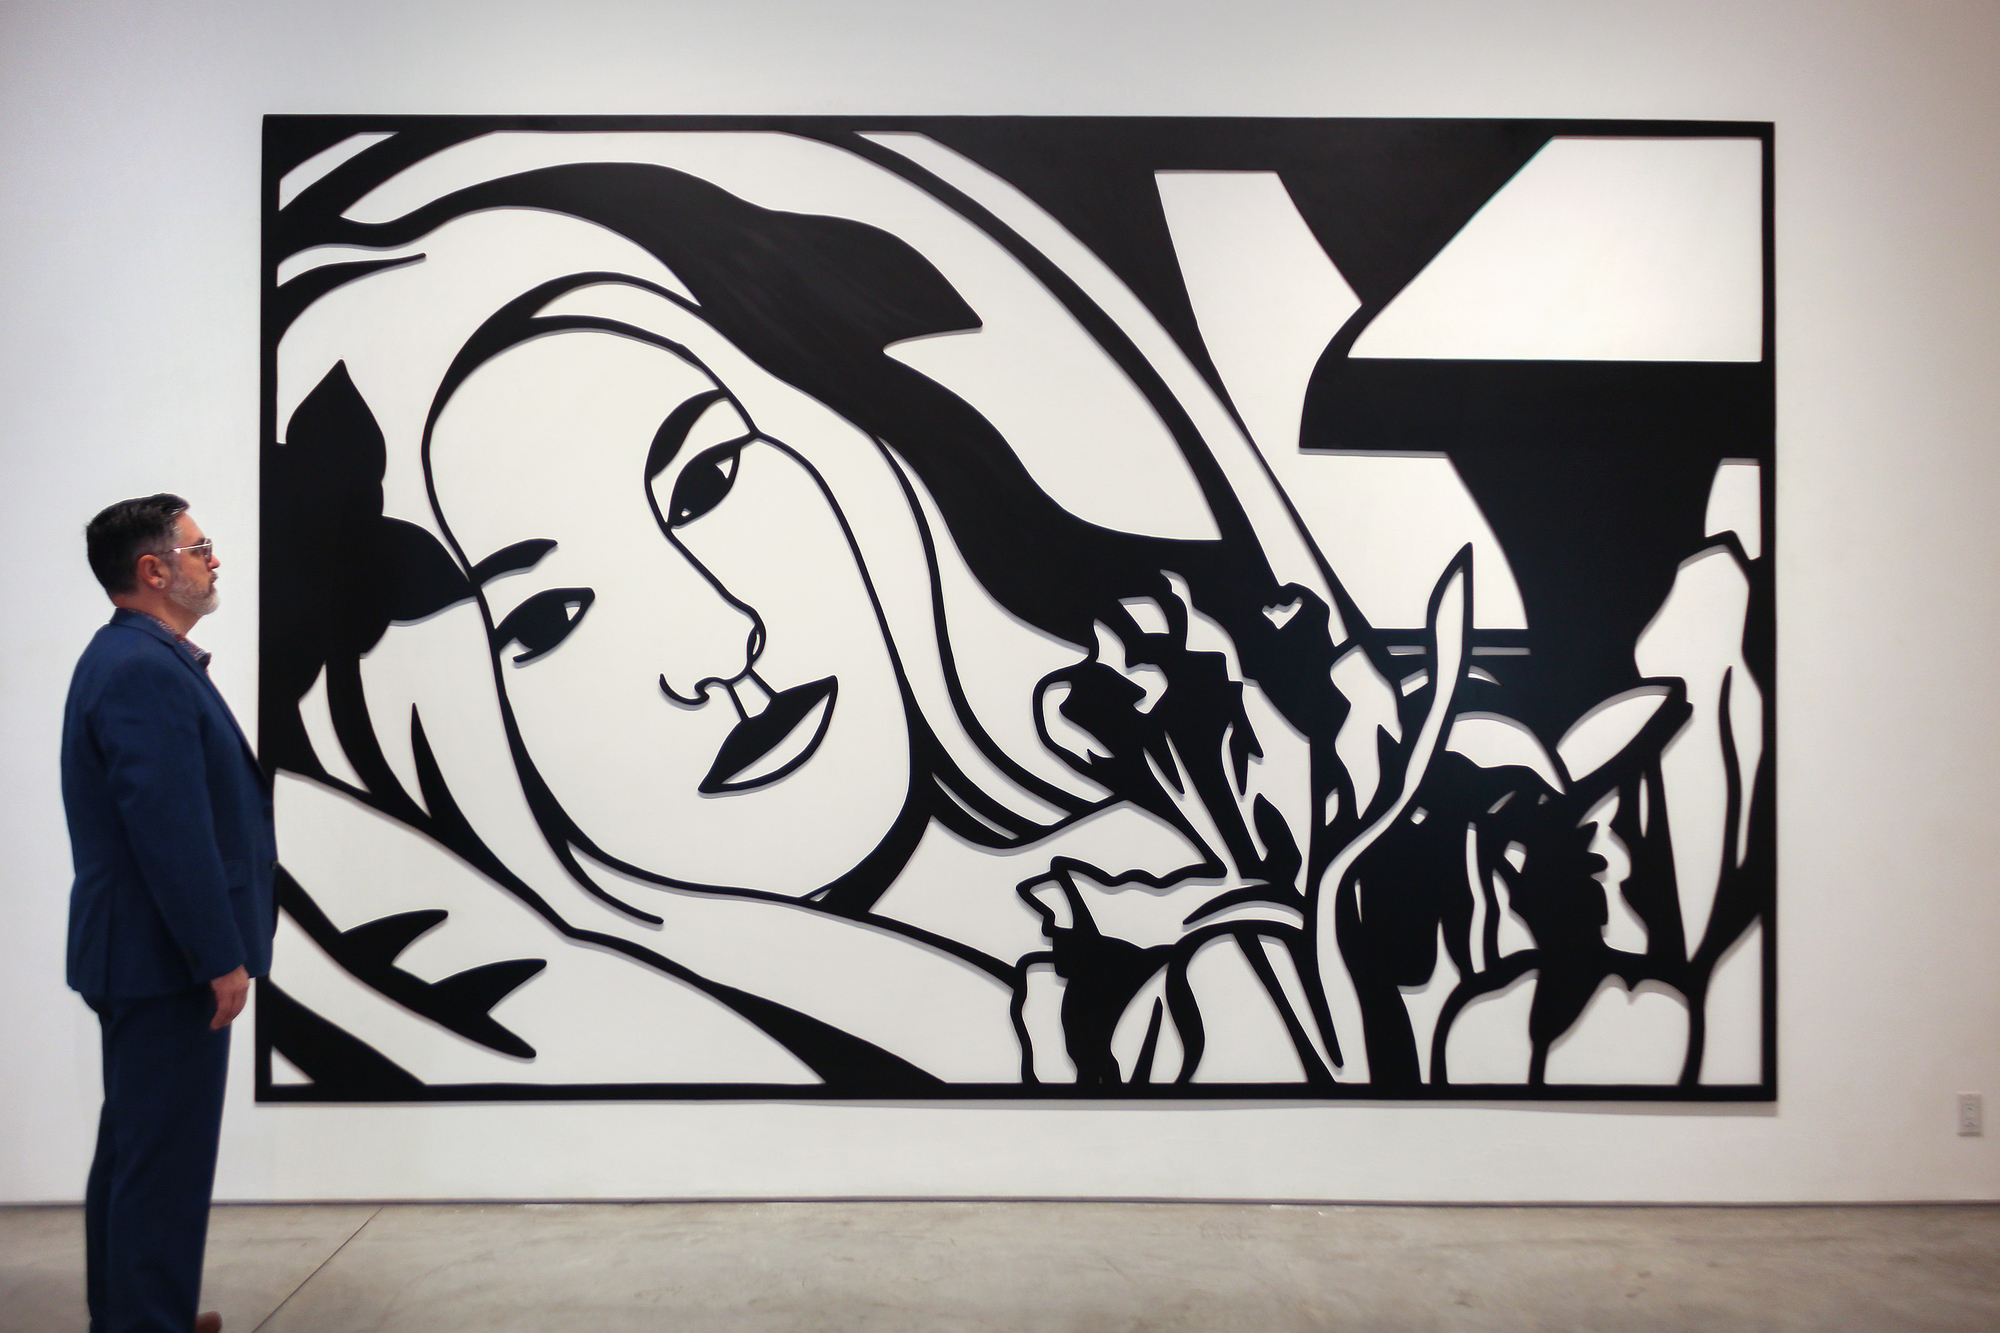 Tom Wesselmann will undoubtedly be remembered for associating his erotic themes with the colors of the American flag. But Wesselmann had considerable gifts as a draftsman, and the line was his principal preoccupation, first as a cartoonist and later as an ardent admirer of Matisse. That he also pioneered a method of turning drawings into laser-cut steel wall reliefs proved a revelation. He began to focus ever more on drawing for the sake of drawing, enchanted that the new medium could be lifted and held: “It really is like being able to pick up a delicate line drawing from the paper.”&lt;br&gt;&lt;br&gt;The Steel Drawings caused both excitement and confusion in the art world. After acquiring one of the ground-breaking works in 1985, the Whitney Museum of American Art wrote Wesselmann wondering if it should be cataloged as a drawing or a sculpture. The work had caused such a stir that when Eric Fischl visited Wesselmann at his studio and saw steel-cut works for the first time, he remembered feeling jealous. He wanted to try it but dared not. It was clear: ‘Tom owned the technique completely.’&lt;br&gt;&lt;br&gt;Wesselmann owed much of that technique to his year-long collaboration with metalwork fabricator Alfred Lippincott. Together, in 1984 they honed a method for cutting the steel with a laser that provided the precision he needed to show the spontaneity of his sketches. Wesselmann called it ‘the best year of my life’, elated at the results that he never fully achieved with aluminum that required each shape be hand-cut.  “I anticipated how exciting it would be for me to get a drawing back in steel. I could hold it in my hands. I could pick it up by the lines…it was so exciting…a kind of near ecstasy, anyway, but there’s really been something about the new work that grabbed me.”&lt;br&gt;&lt;br&gt;Bedroom Brunette with Irises is a Steel Drawing masterwork that despite its uber-generous scale, utilizes tight cropping to provide an unimposing intimacy while maintaining a free and spontaneous quality. The figure’s outstretched arms and limbs and body intertwine with the petals and the interior elements providing a flowing investigative foray of black lines and white ‘drop out’ shapes provided by the wall. It recalls Matisse and any number of his reclining odalisque paintings. Wesselmann often tested monochromatic values to discover the extent to which color would transform his hybrid objects into newly developed Steel Drawing works and, in this case, continued with a color steel-cut version of the composition Bedroom Blonde with Irises (1987) and later still, in 1993 with a large-scale drawing in charcoal and pastel on paper.